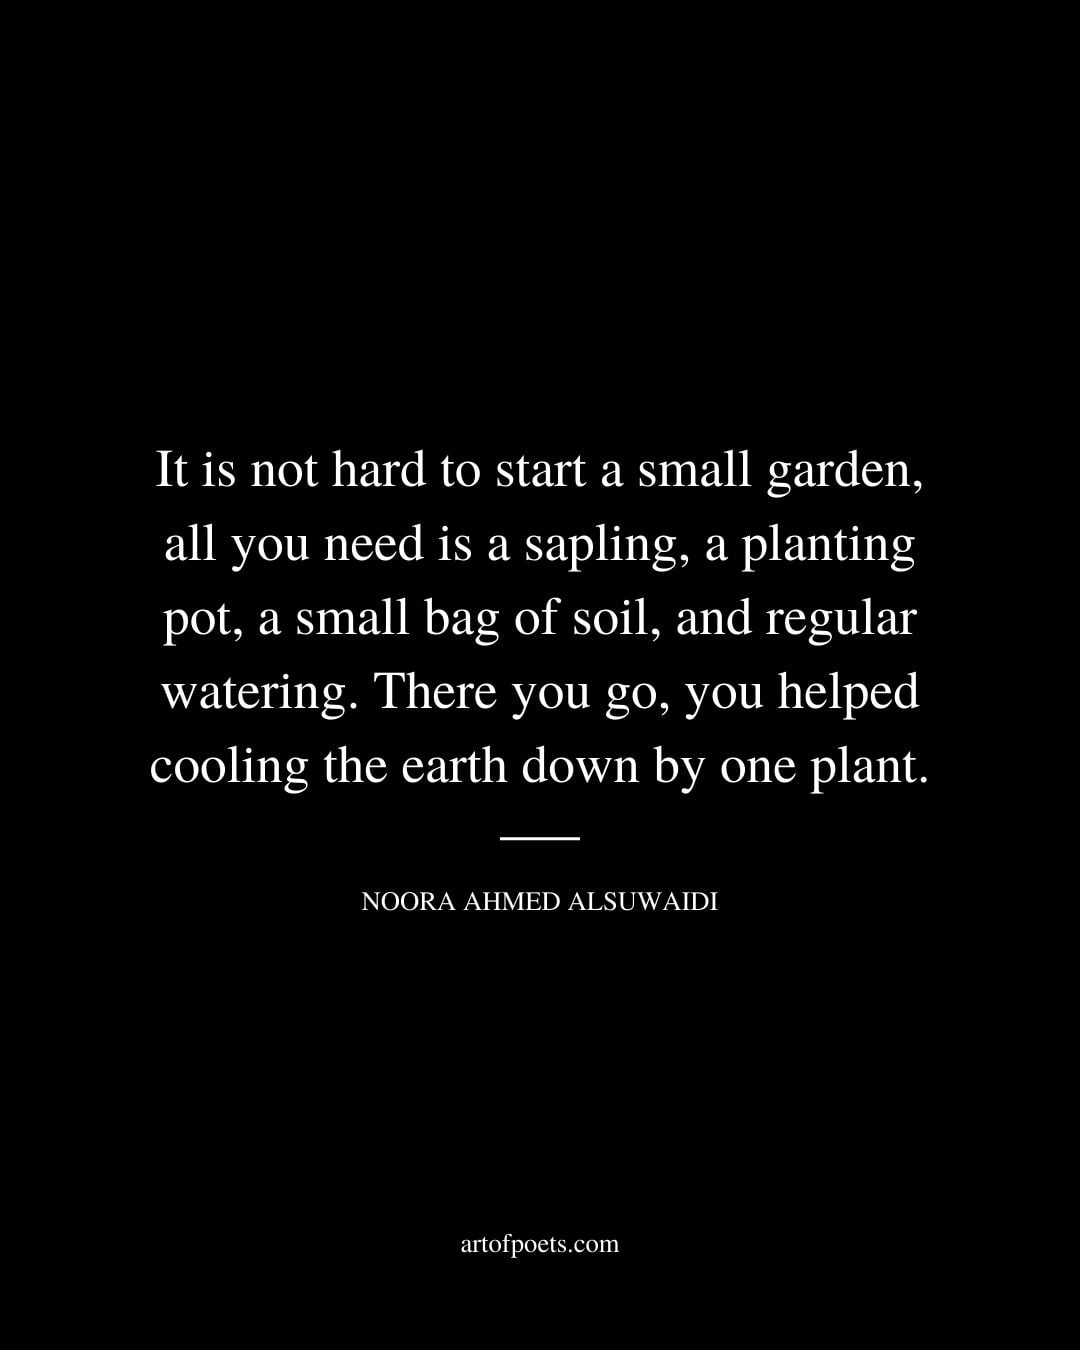 It is not hard to start a small garden all you need is a sapling a planting pot a small bag of soil